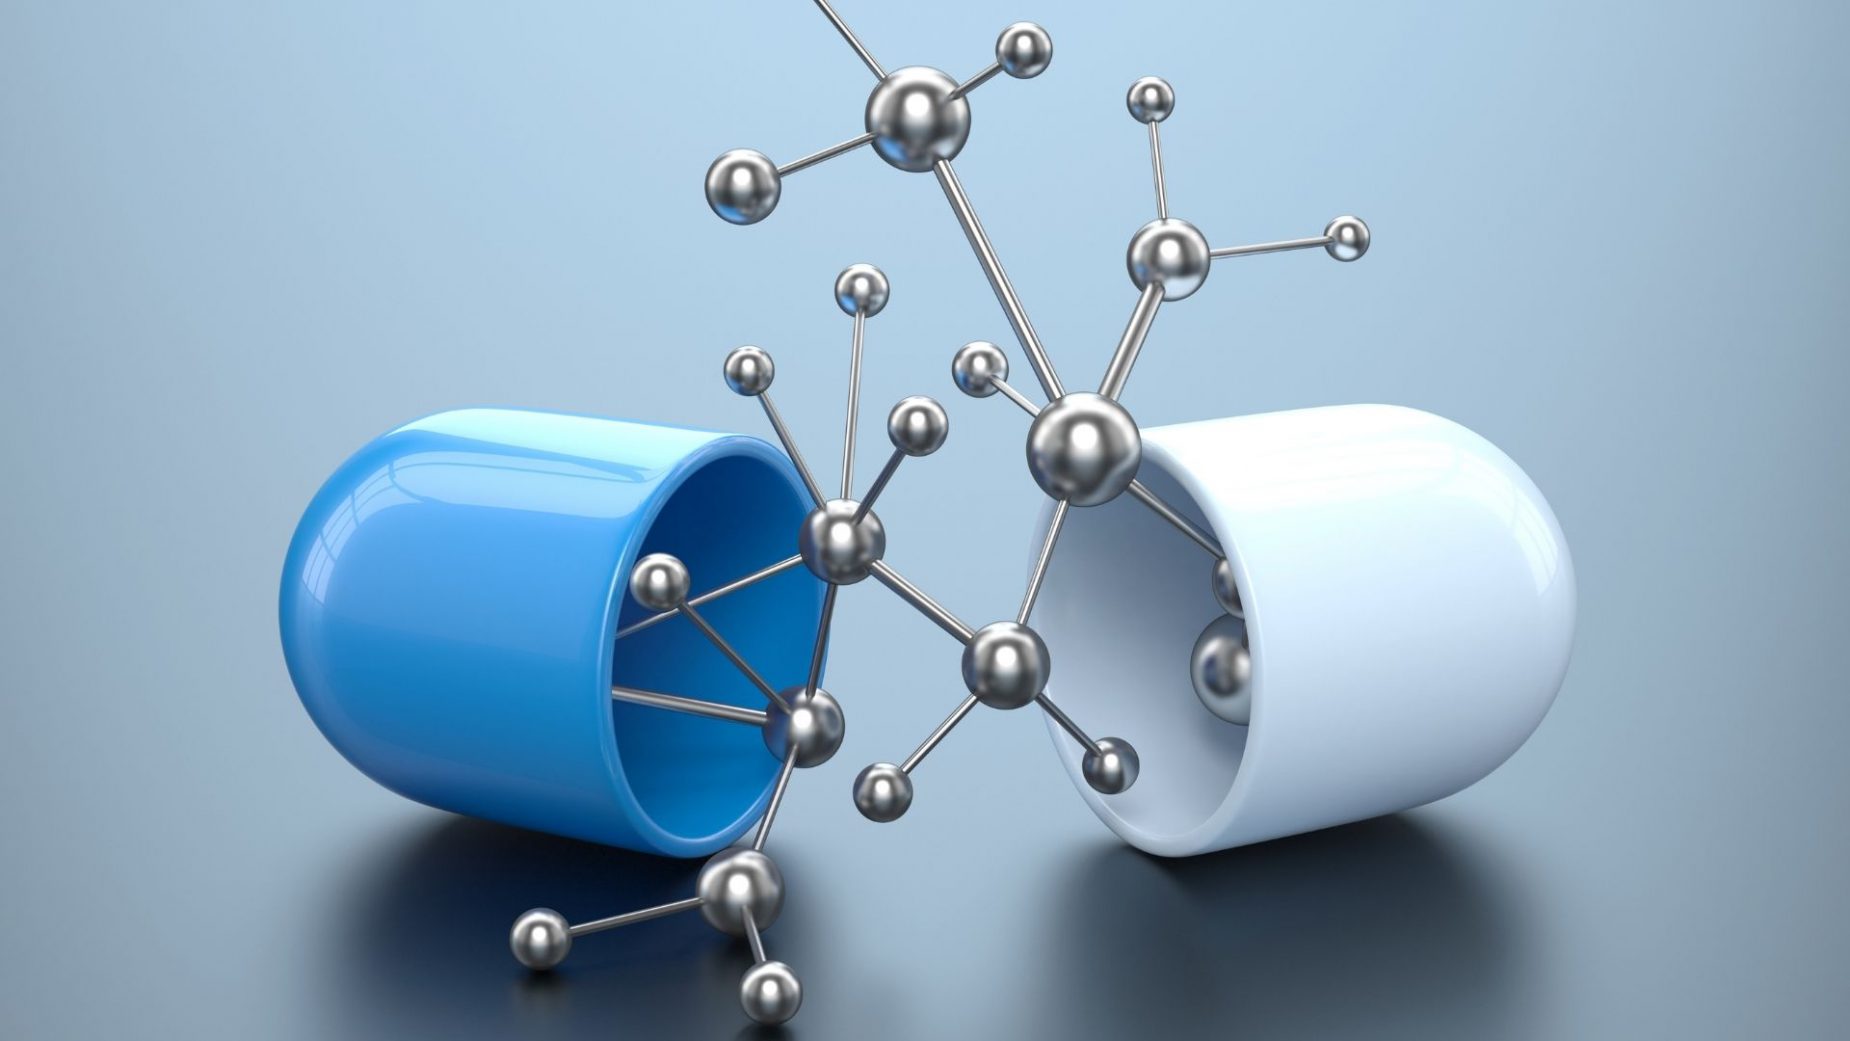 Global Healthcare Nanotechnology Market Overview And Prospects